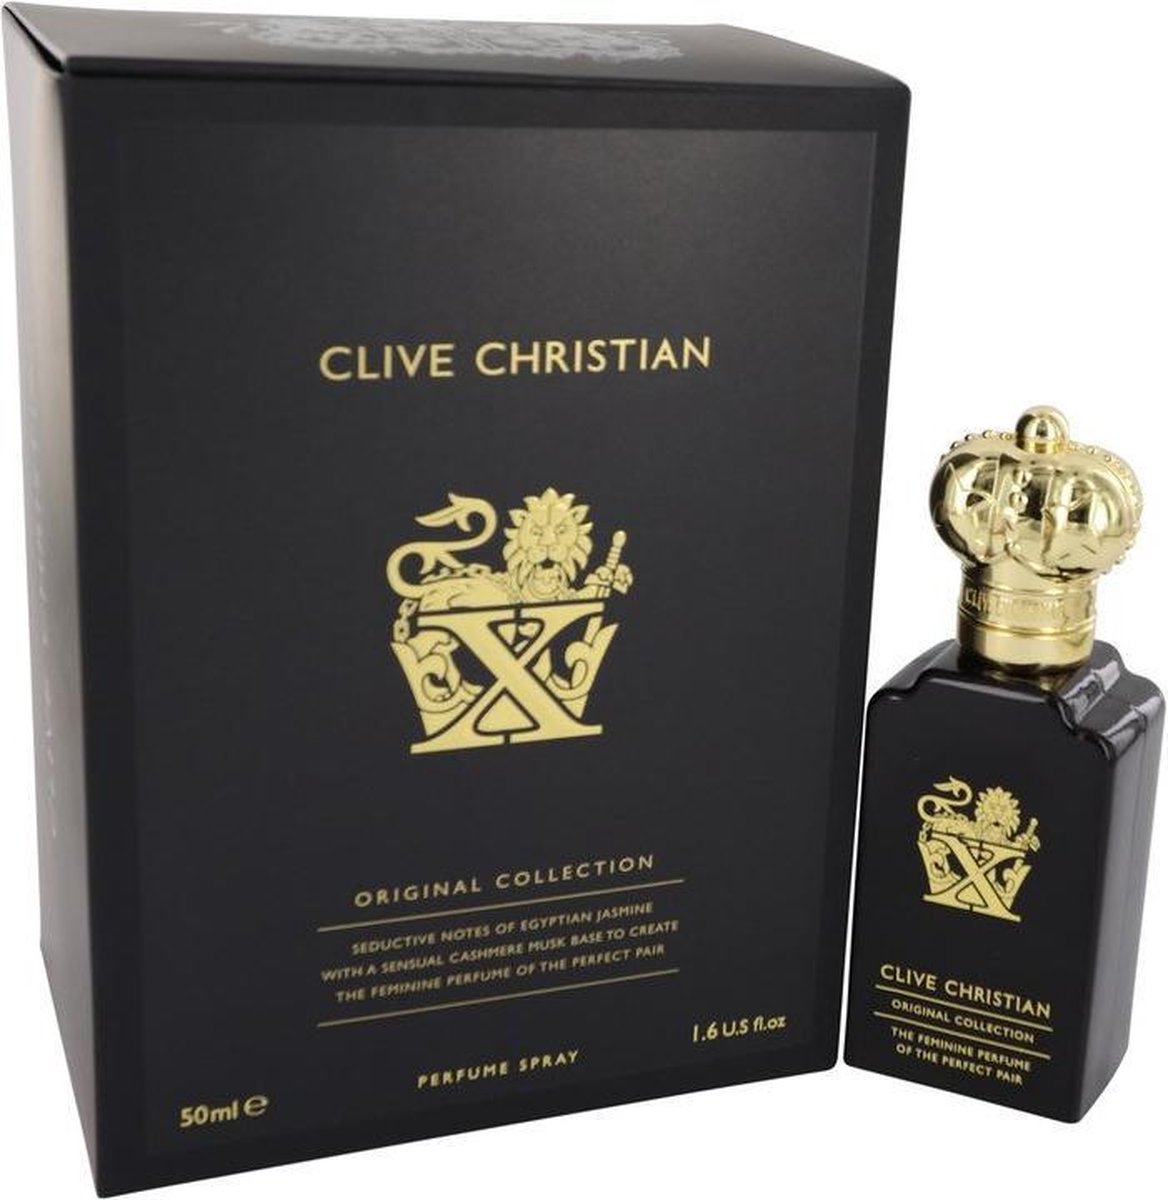 Clive Christian X by Clive Christian 50 ml - Pure Parfum Spray (New Packaging)